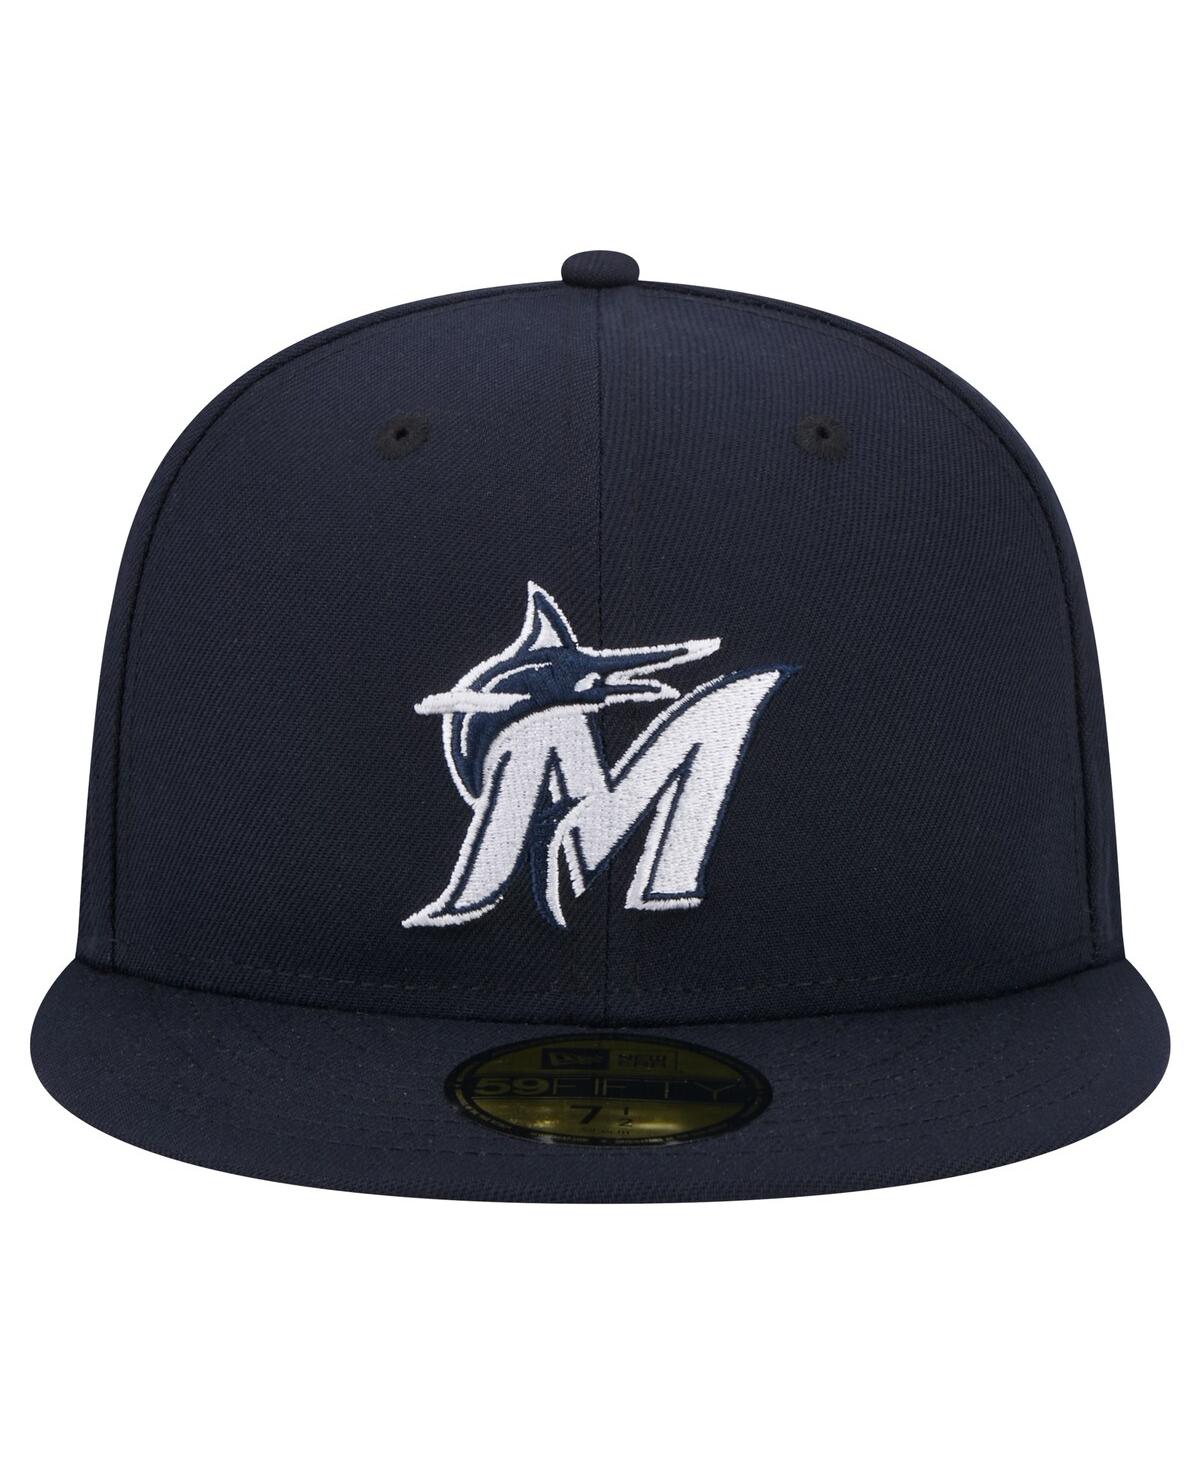 Shop New Era Men's Navy Miami Marlins White Logo 59fifty Fitted Hat